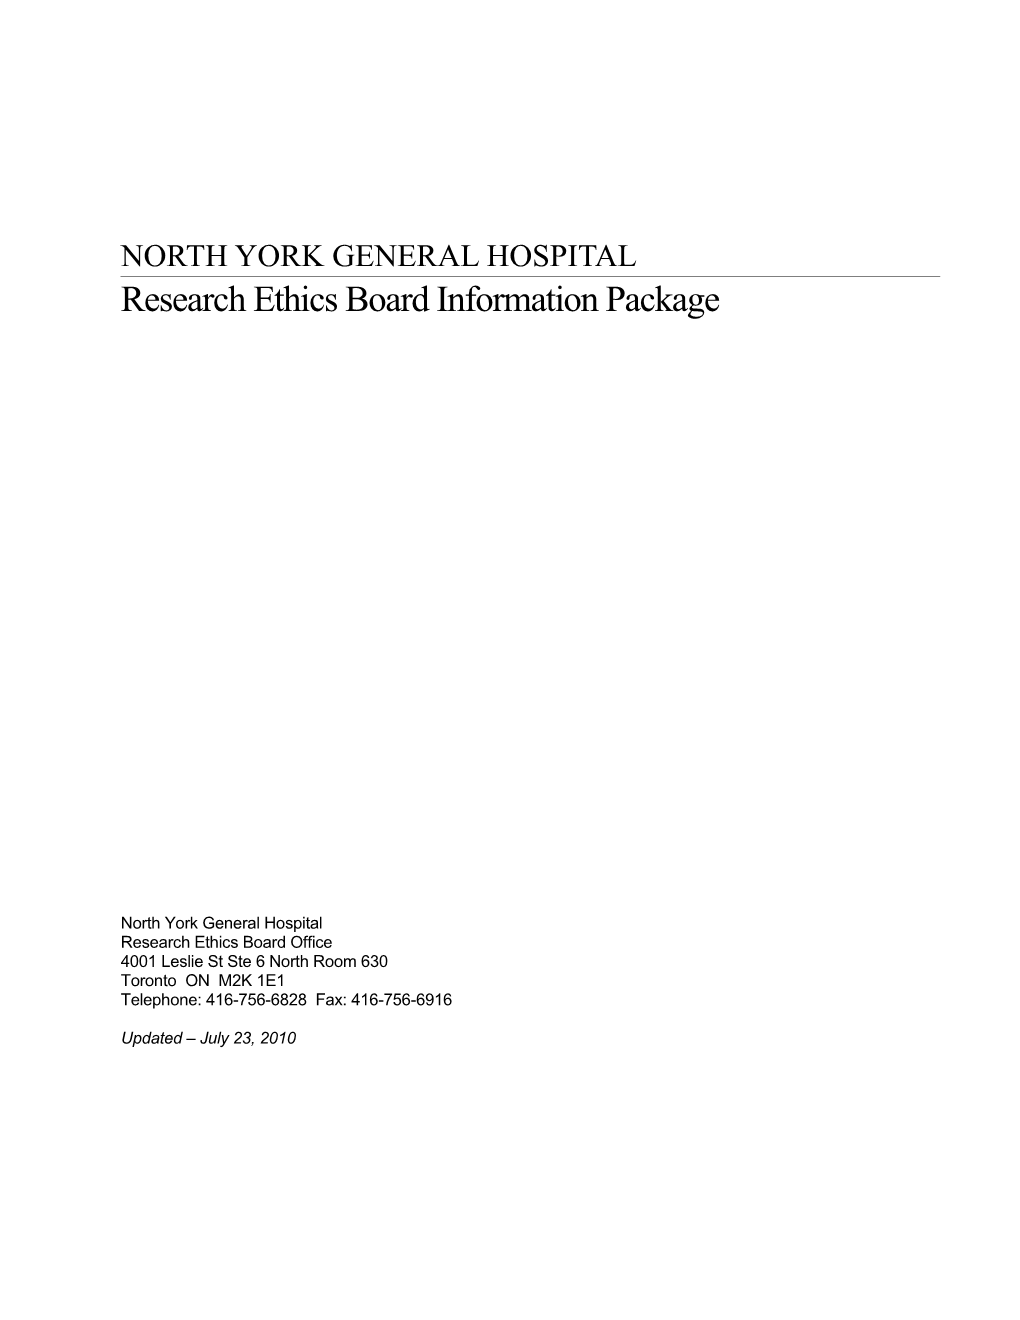 Research Ethics Board Information Package